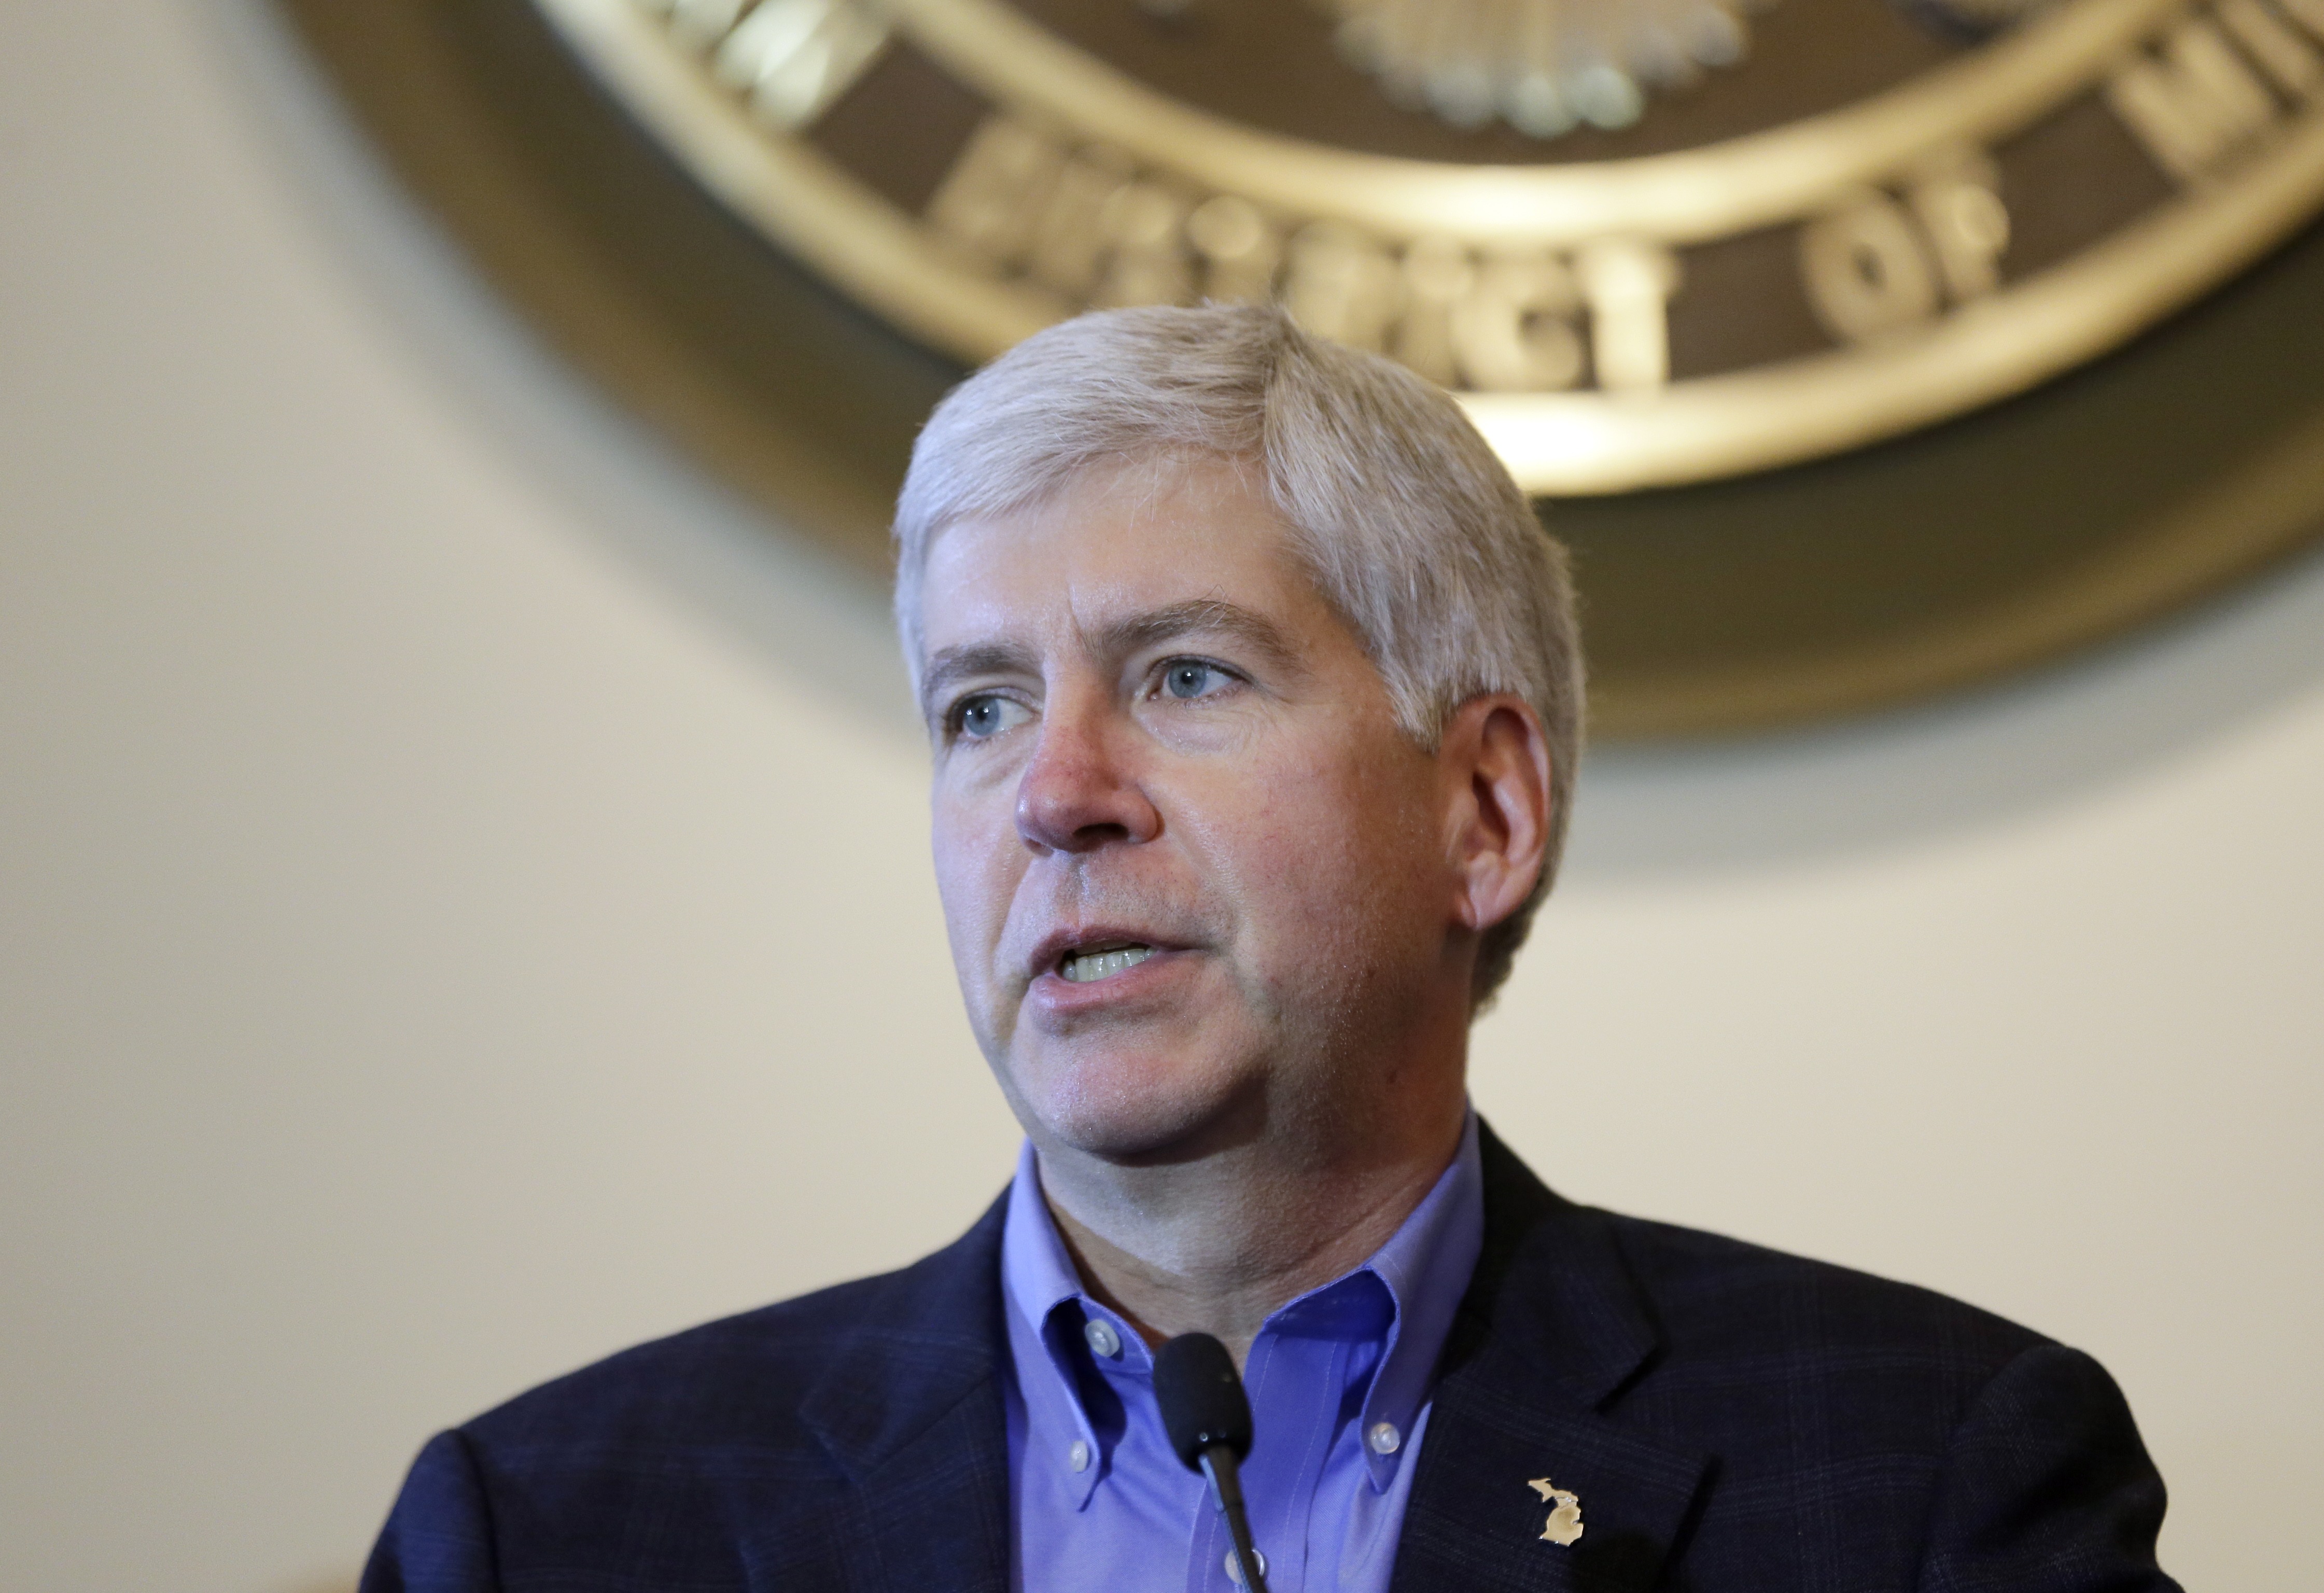 Michigan Gov. Rick Snyder addresses the media during a news conference in Detroit on Nov. 7, 2014. (Carlos Osorio—AP)